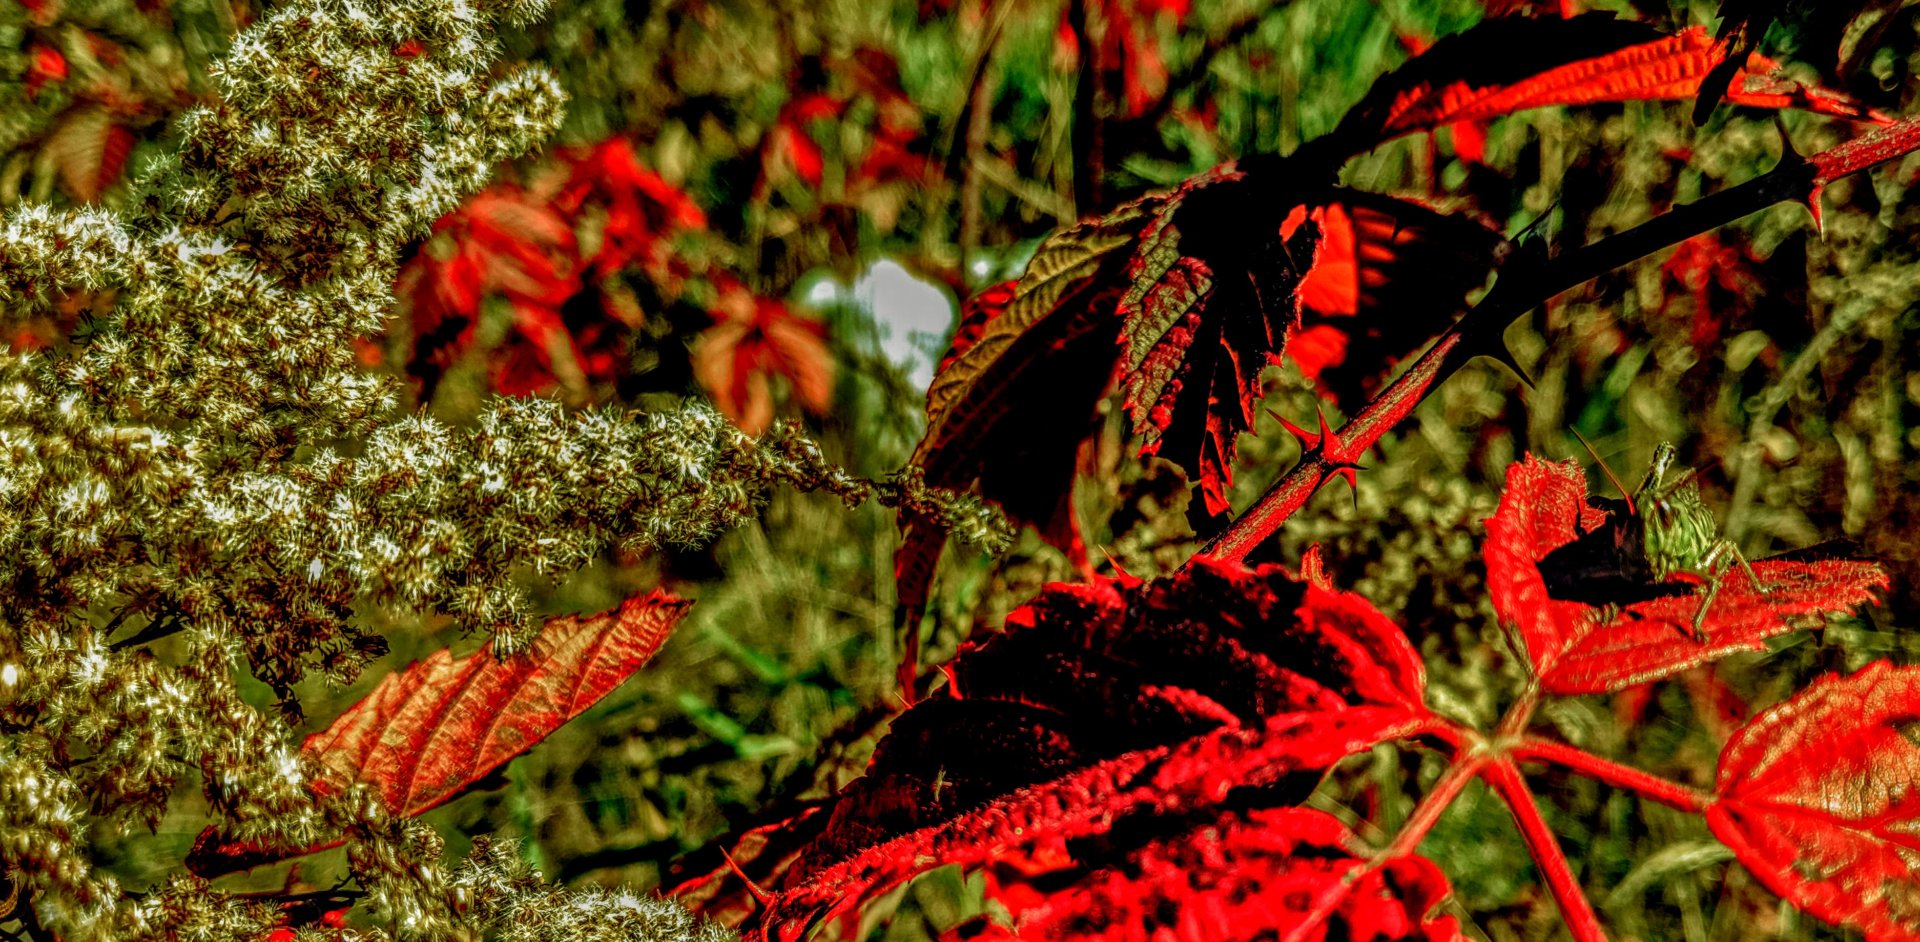 oct, 20 2019, perry Maine, red leaf with grasshopper and white seed flower closeup